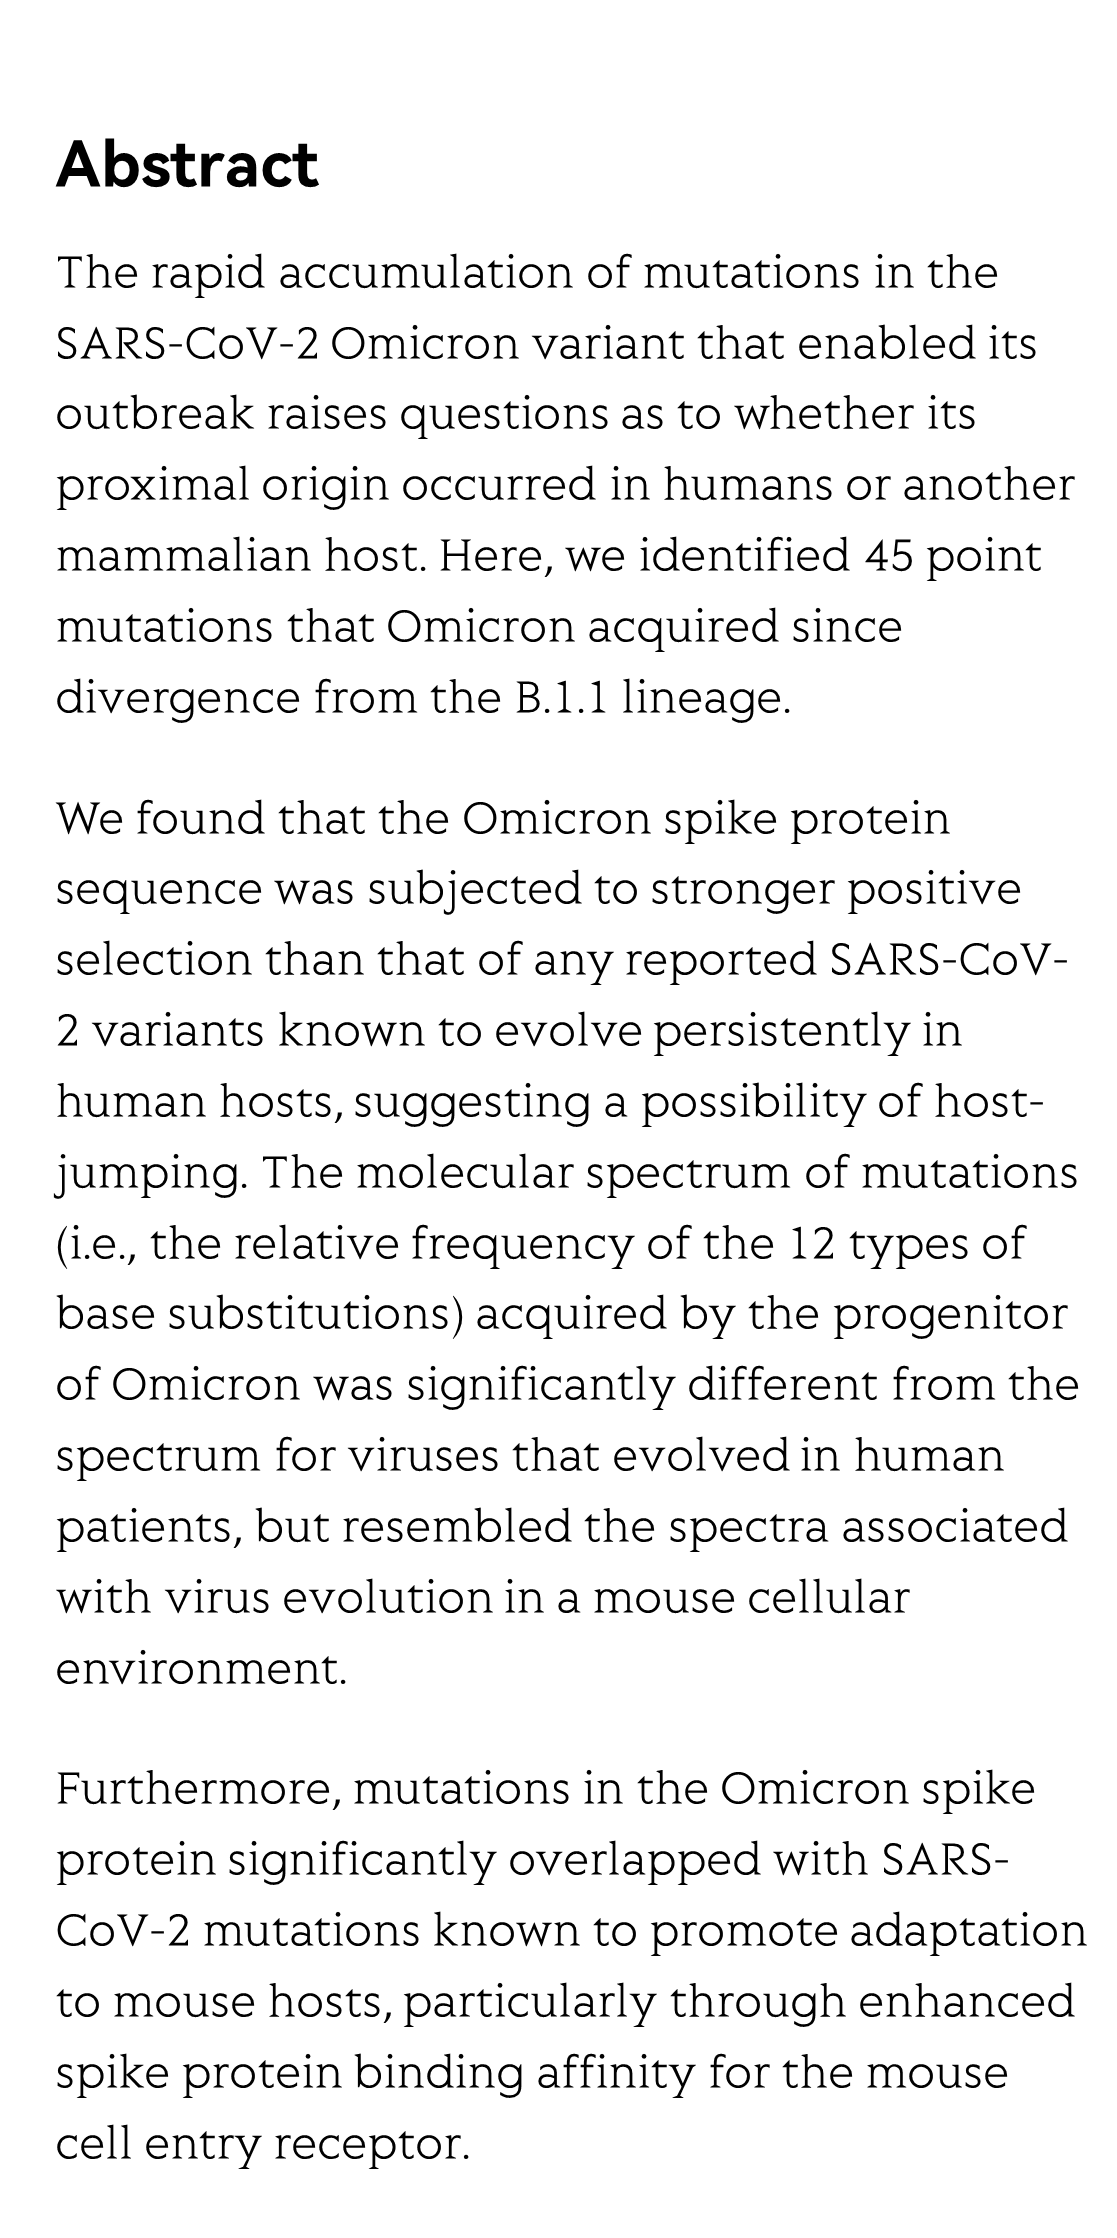 Evidence for a mouse origin of the SARS-CoV-2 Omicron variant_2